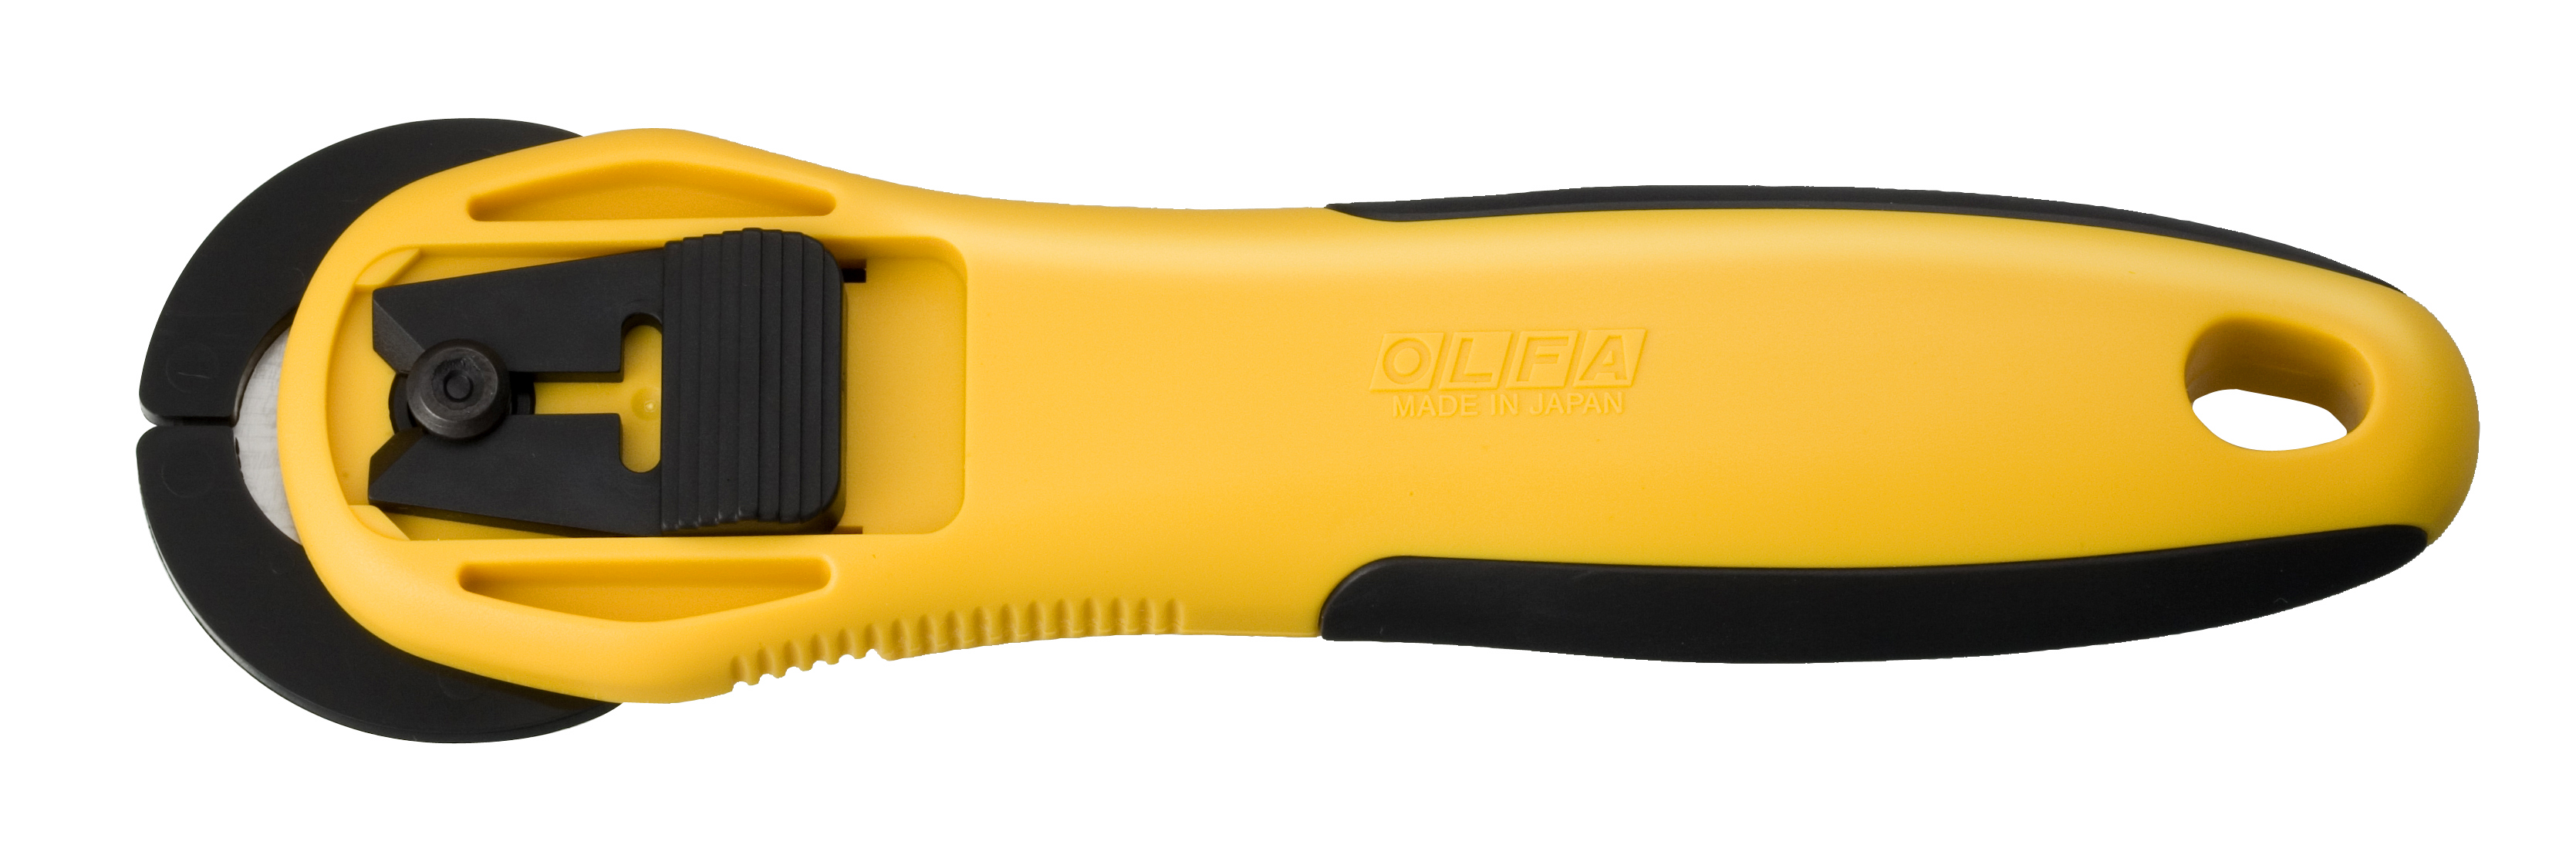 Olfa Quick Change Rotary Cutter RTY-2/NS (45mm)